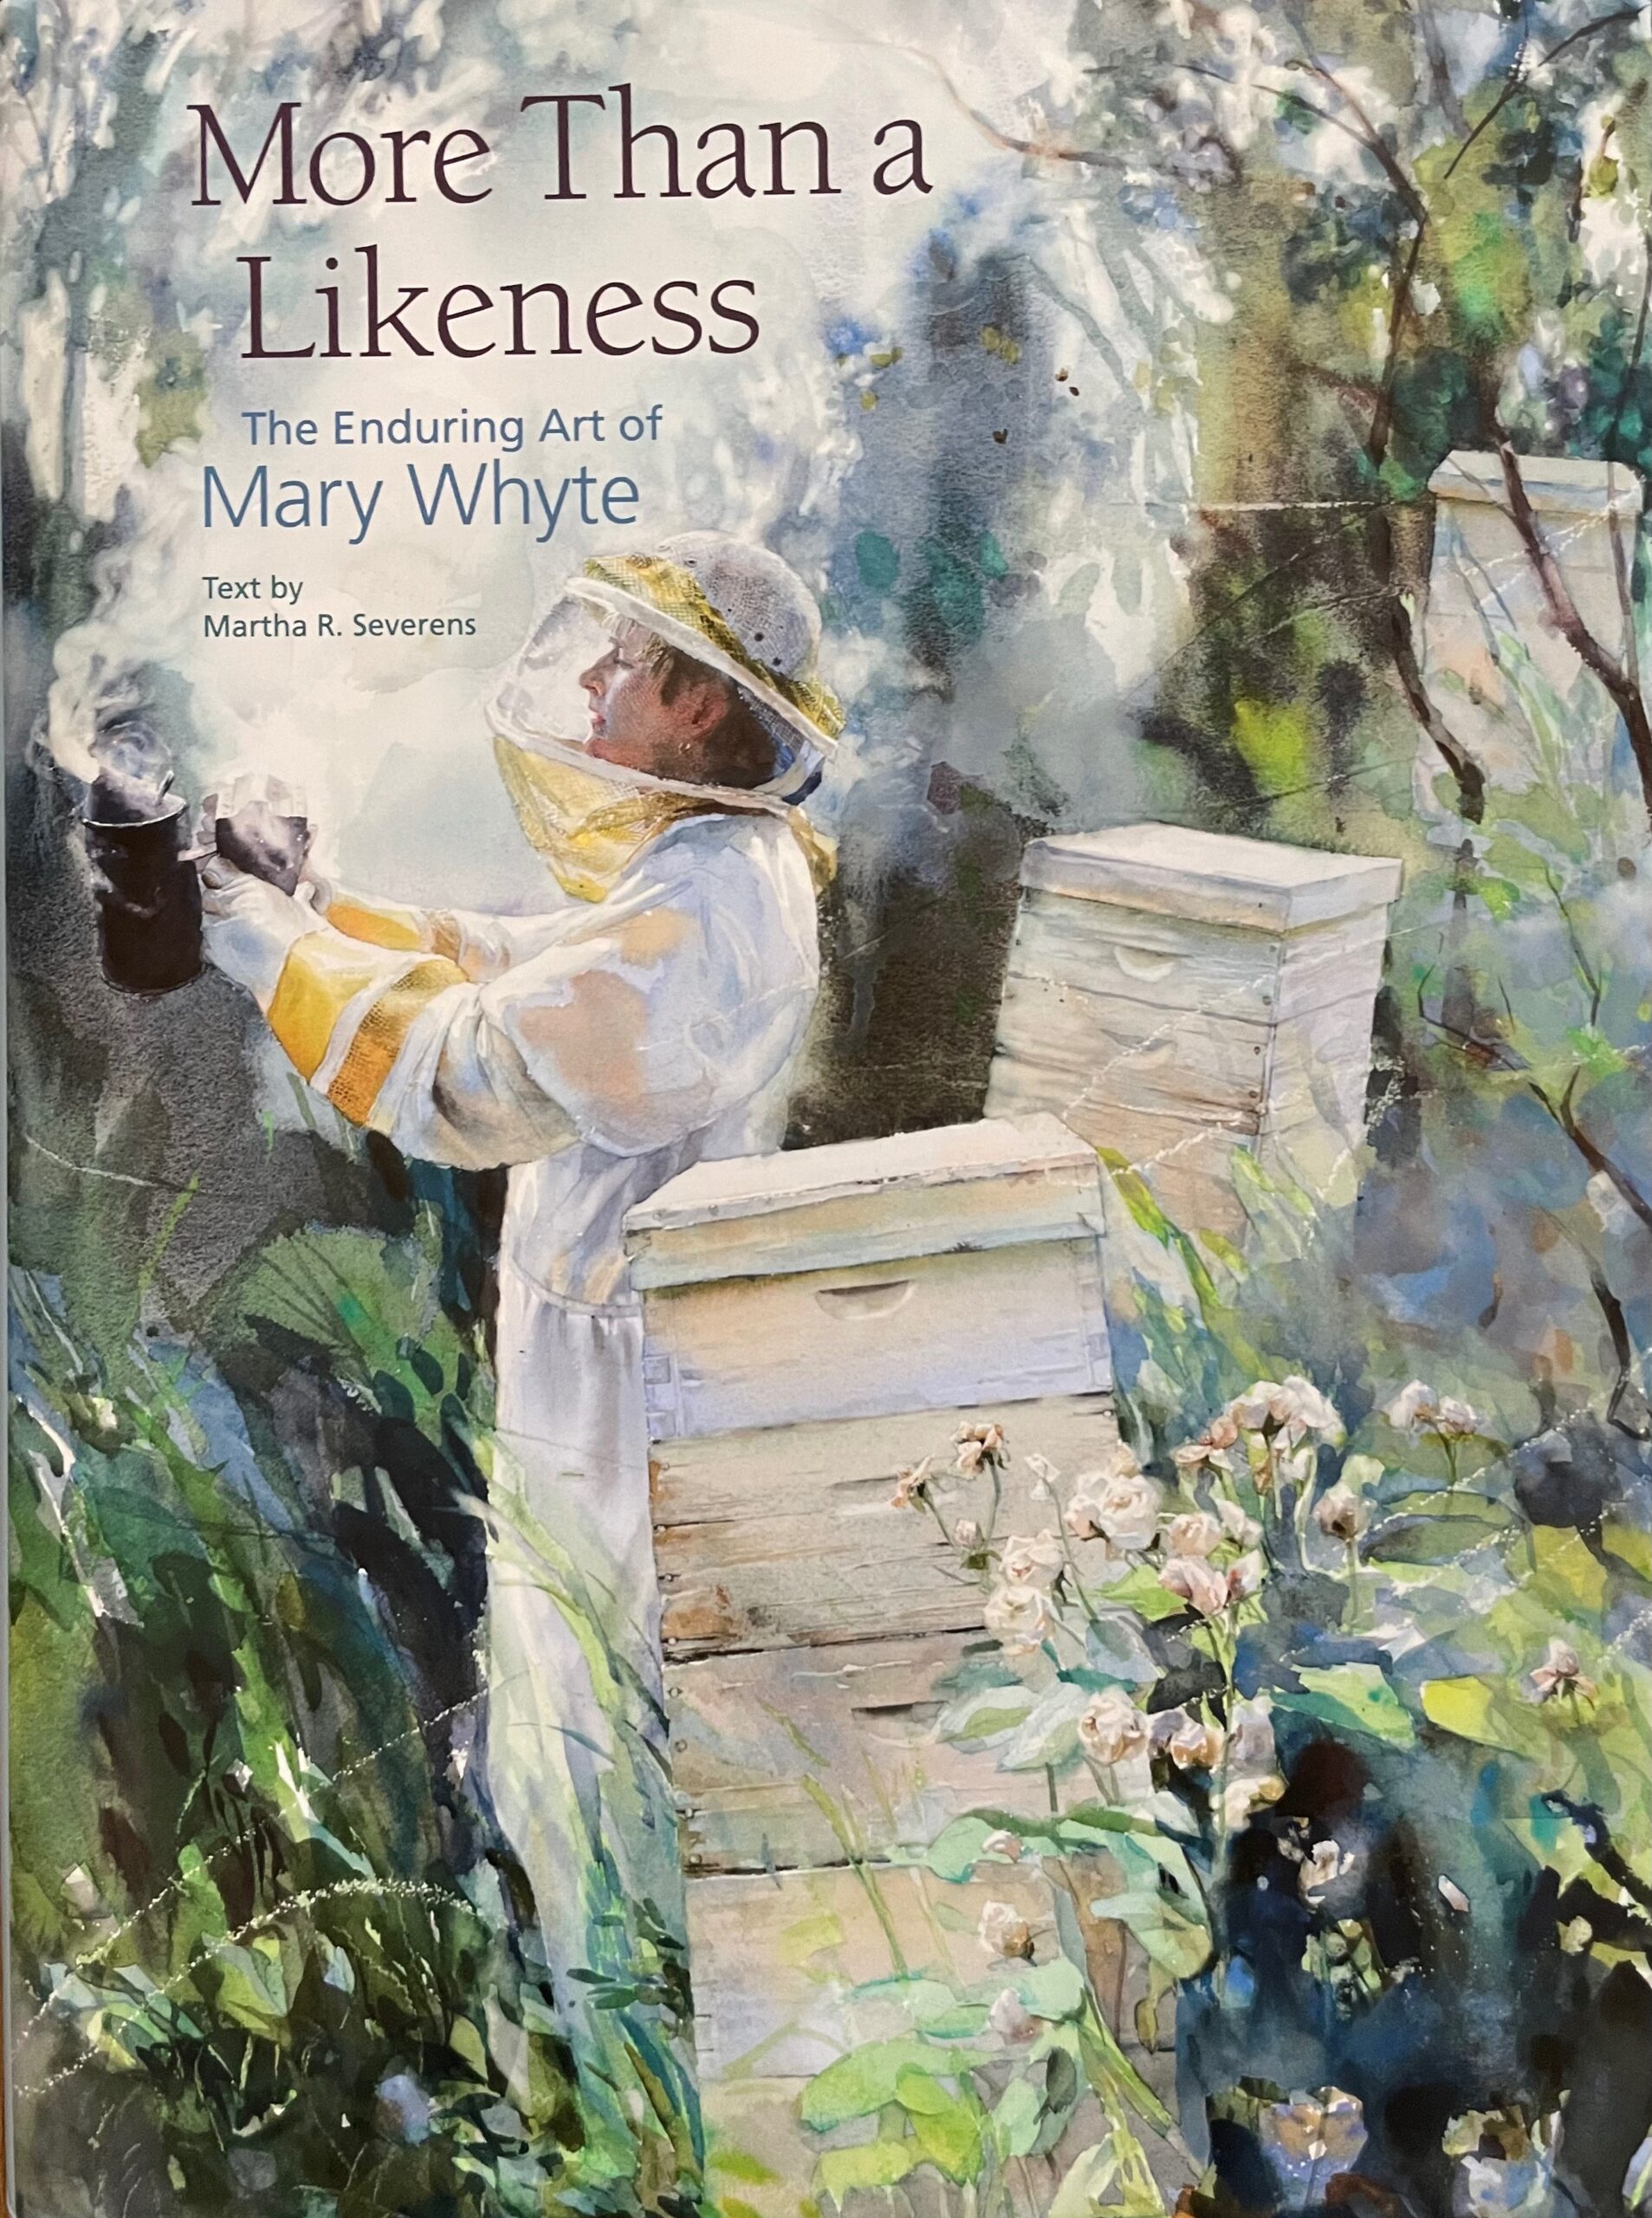 Artbook:  More Than a Likeness: The Enduring Art of Mary Whyte